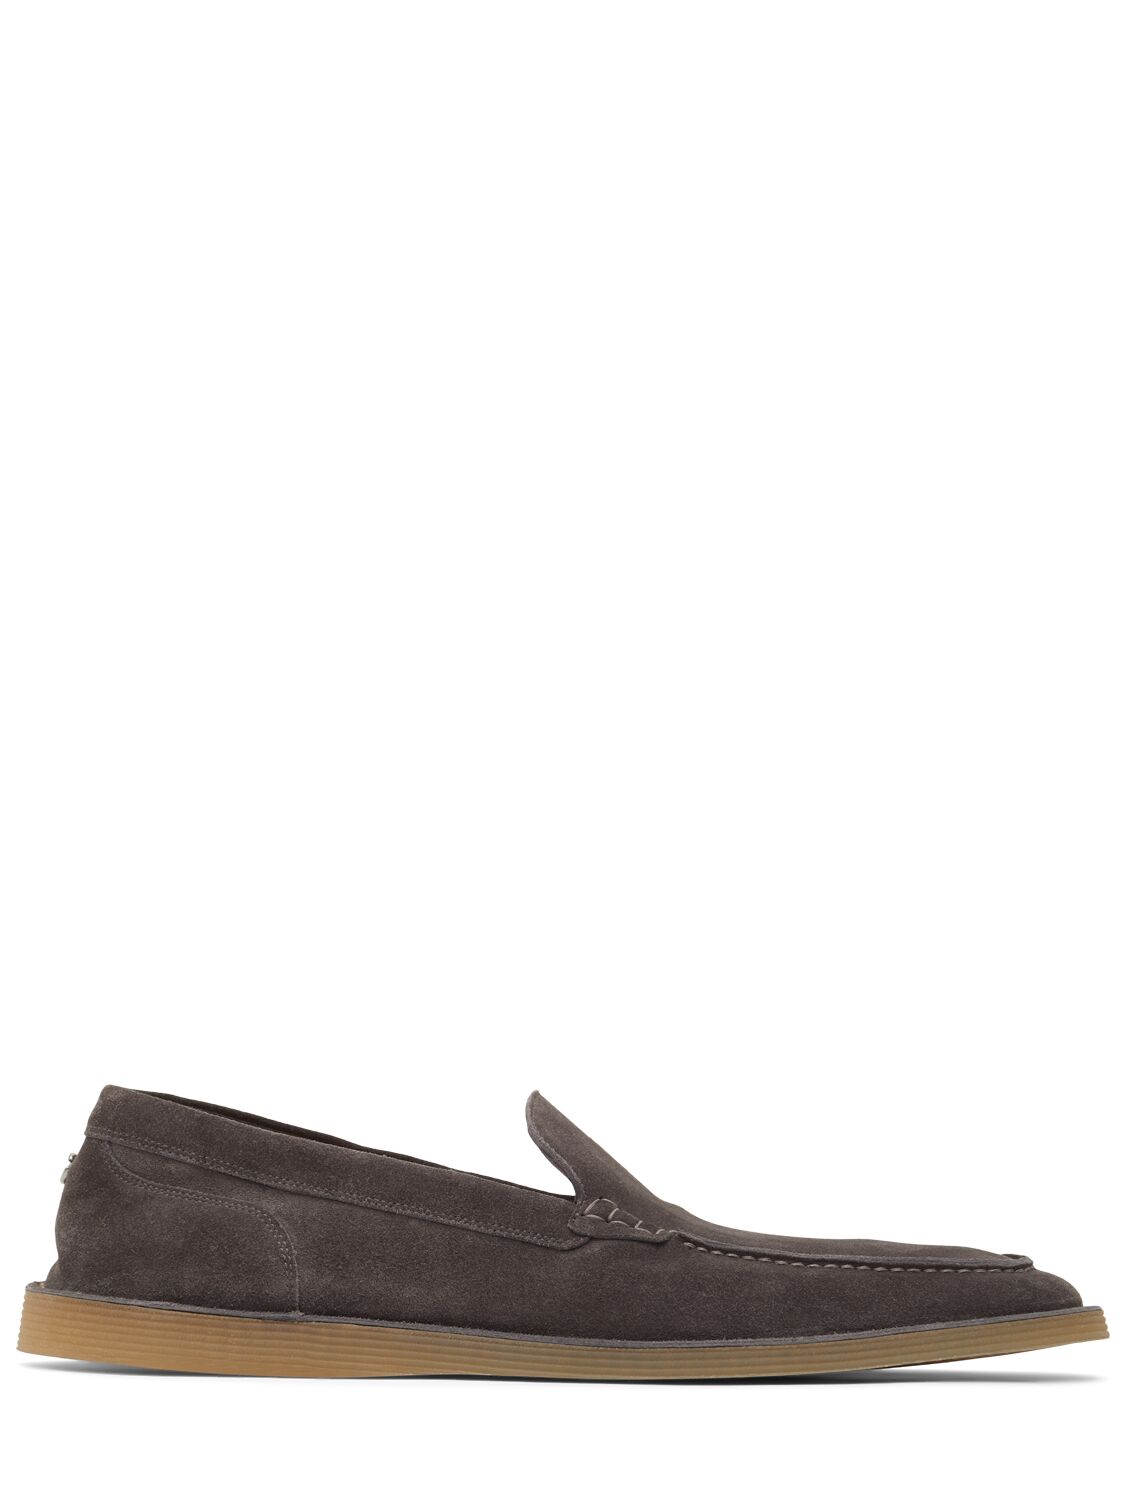 Dolce & Gabbana New Florio Suede Loafers In Grey